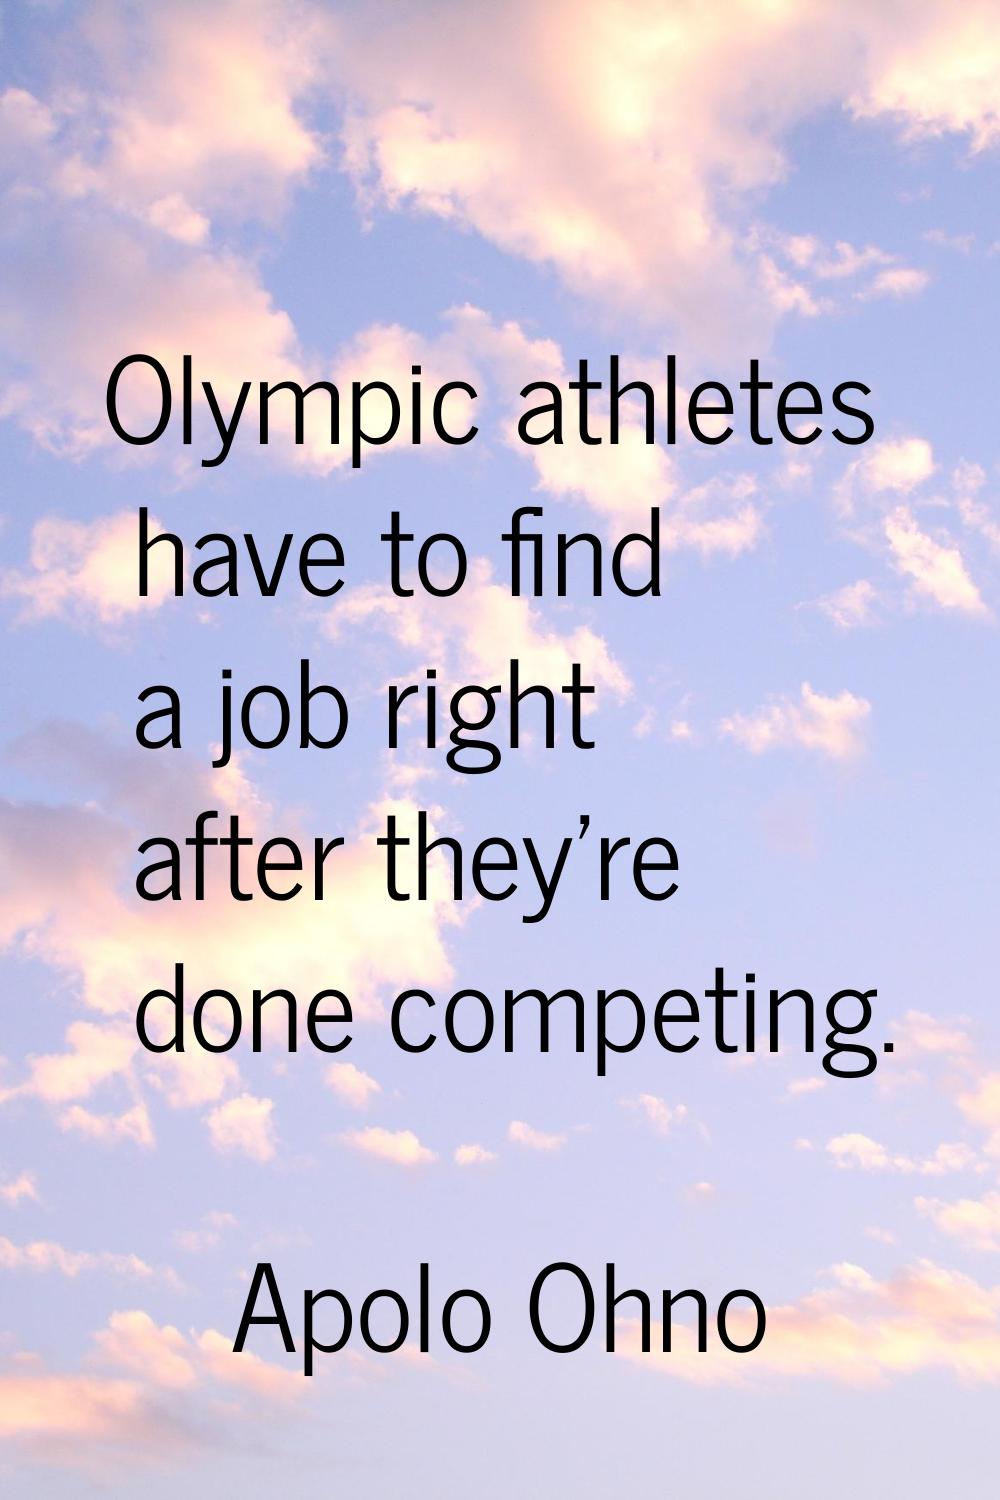 Olympic athletes have to find a job right after they're done competing.